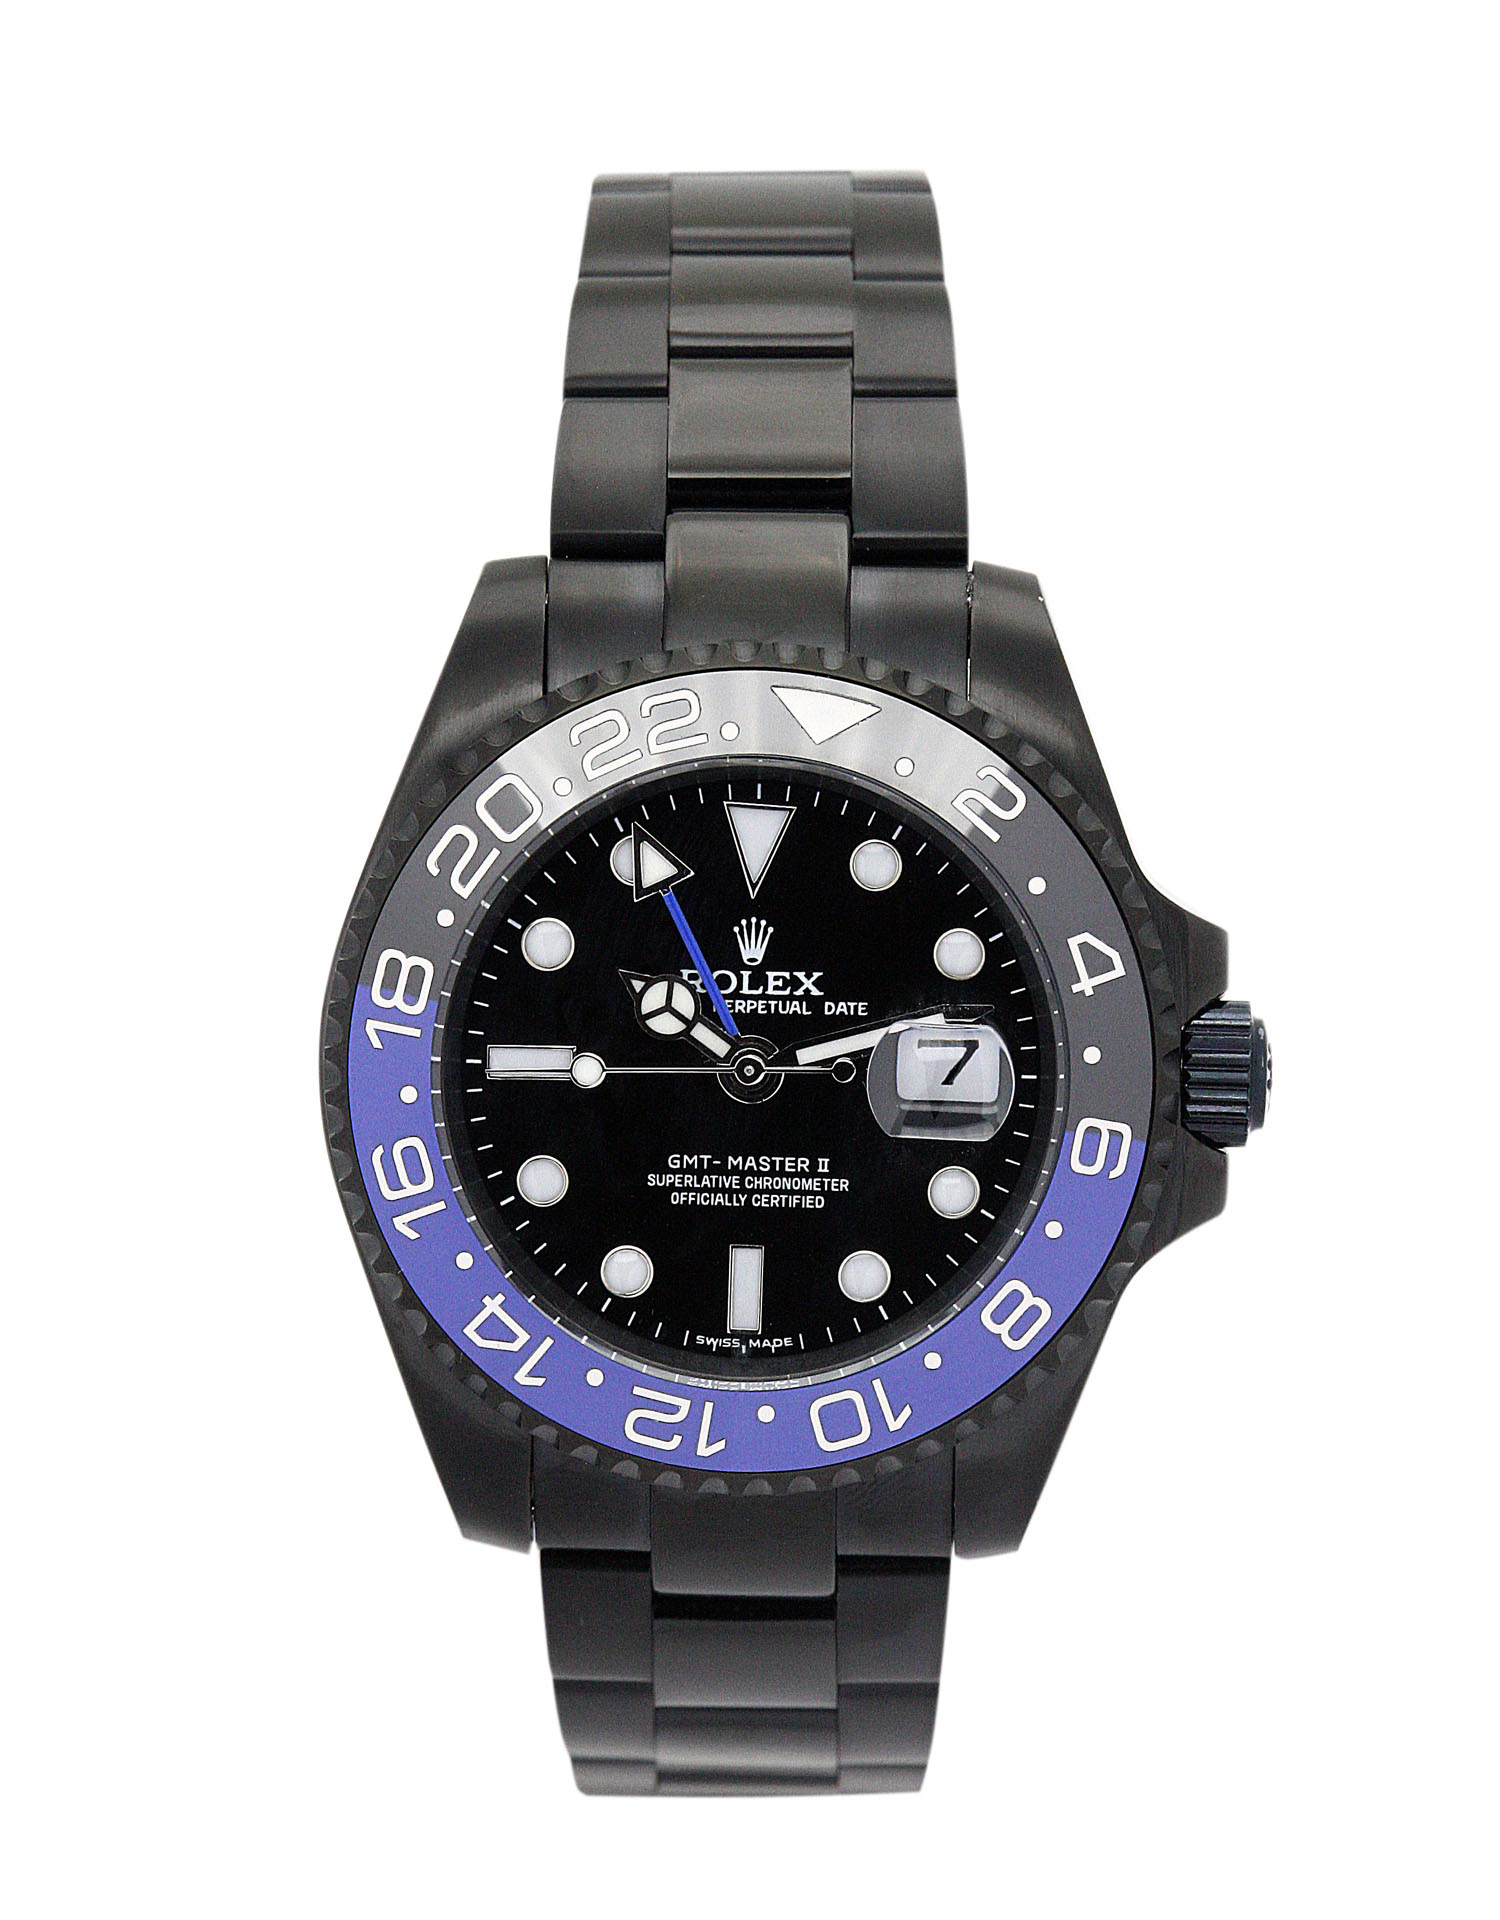 Replica Rolex Watches: Gmt Master Rolex, Fake Knock Off Watches